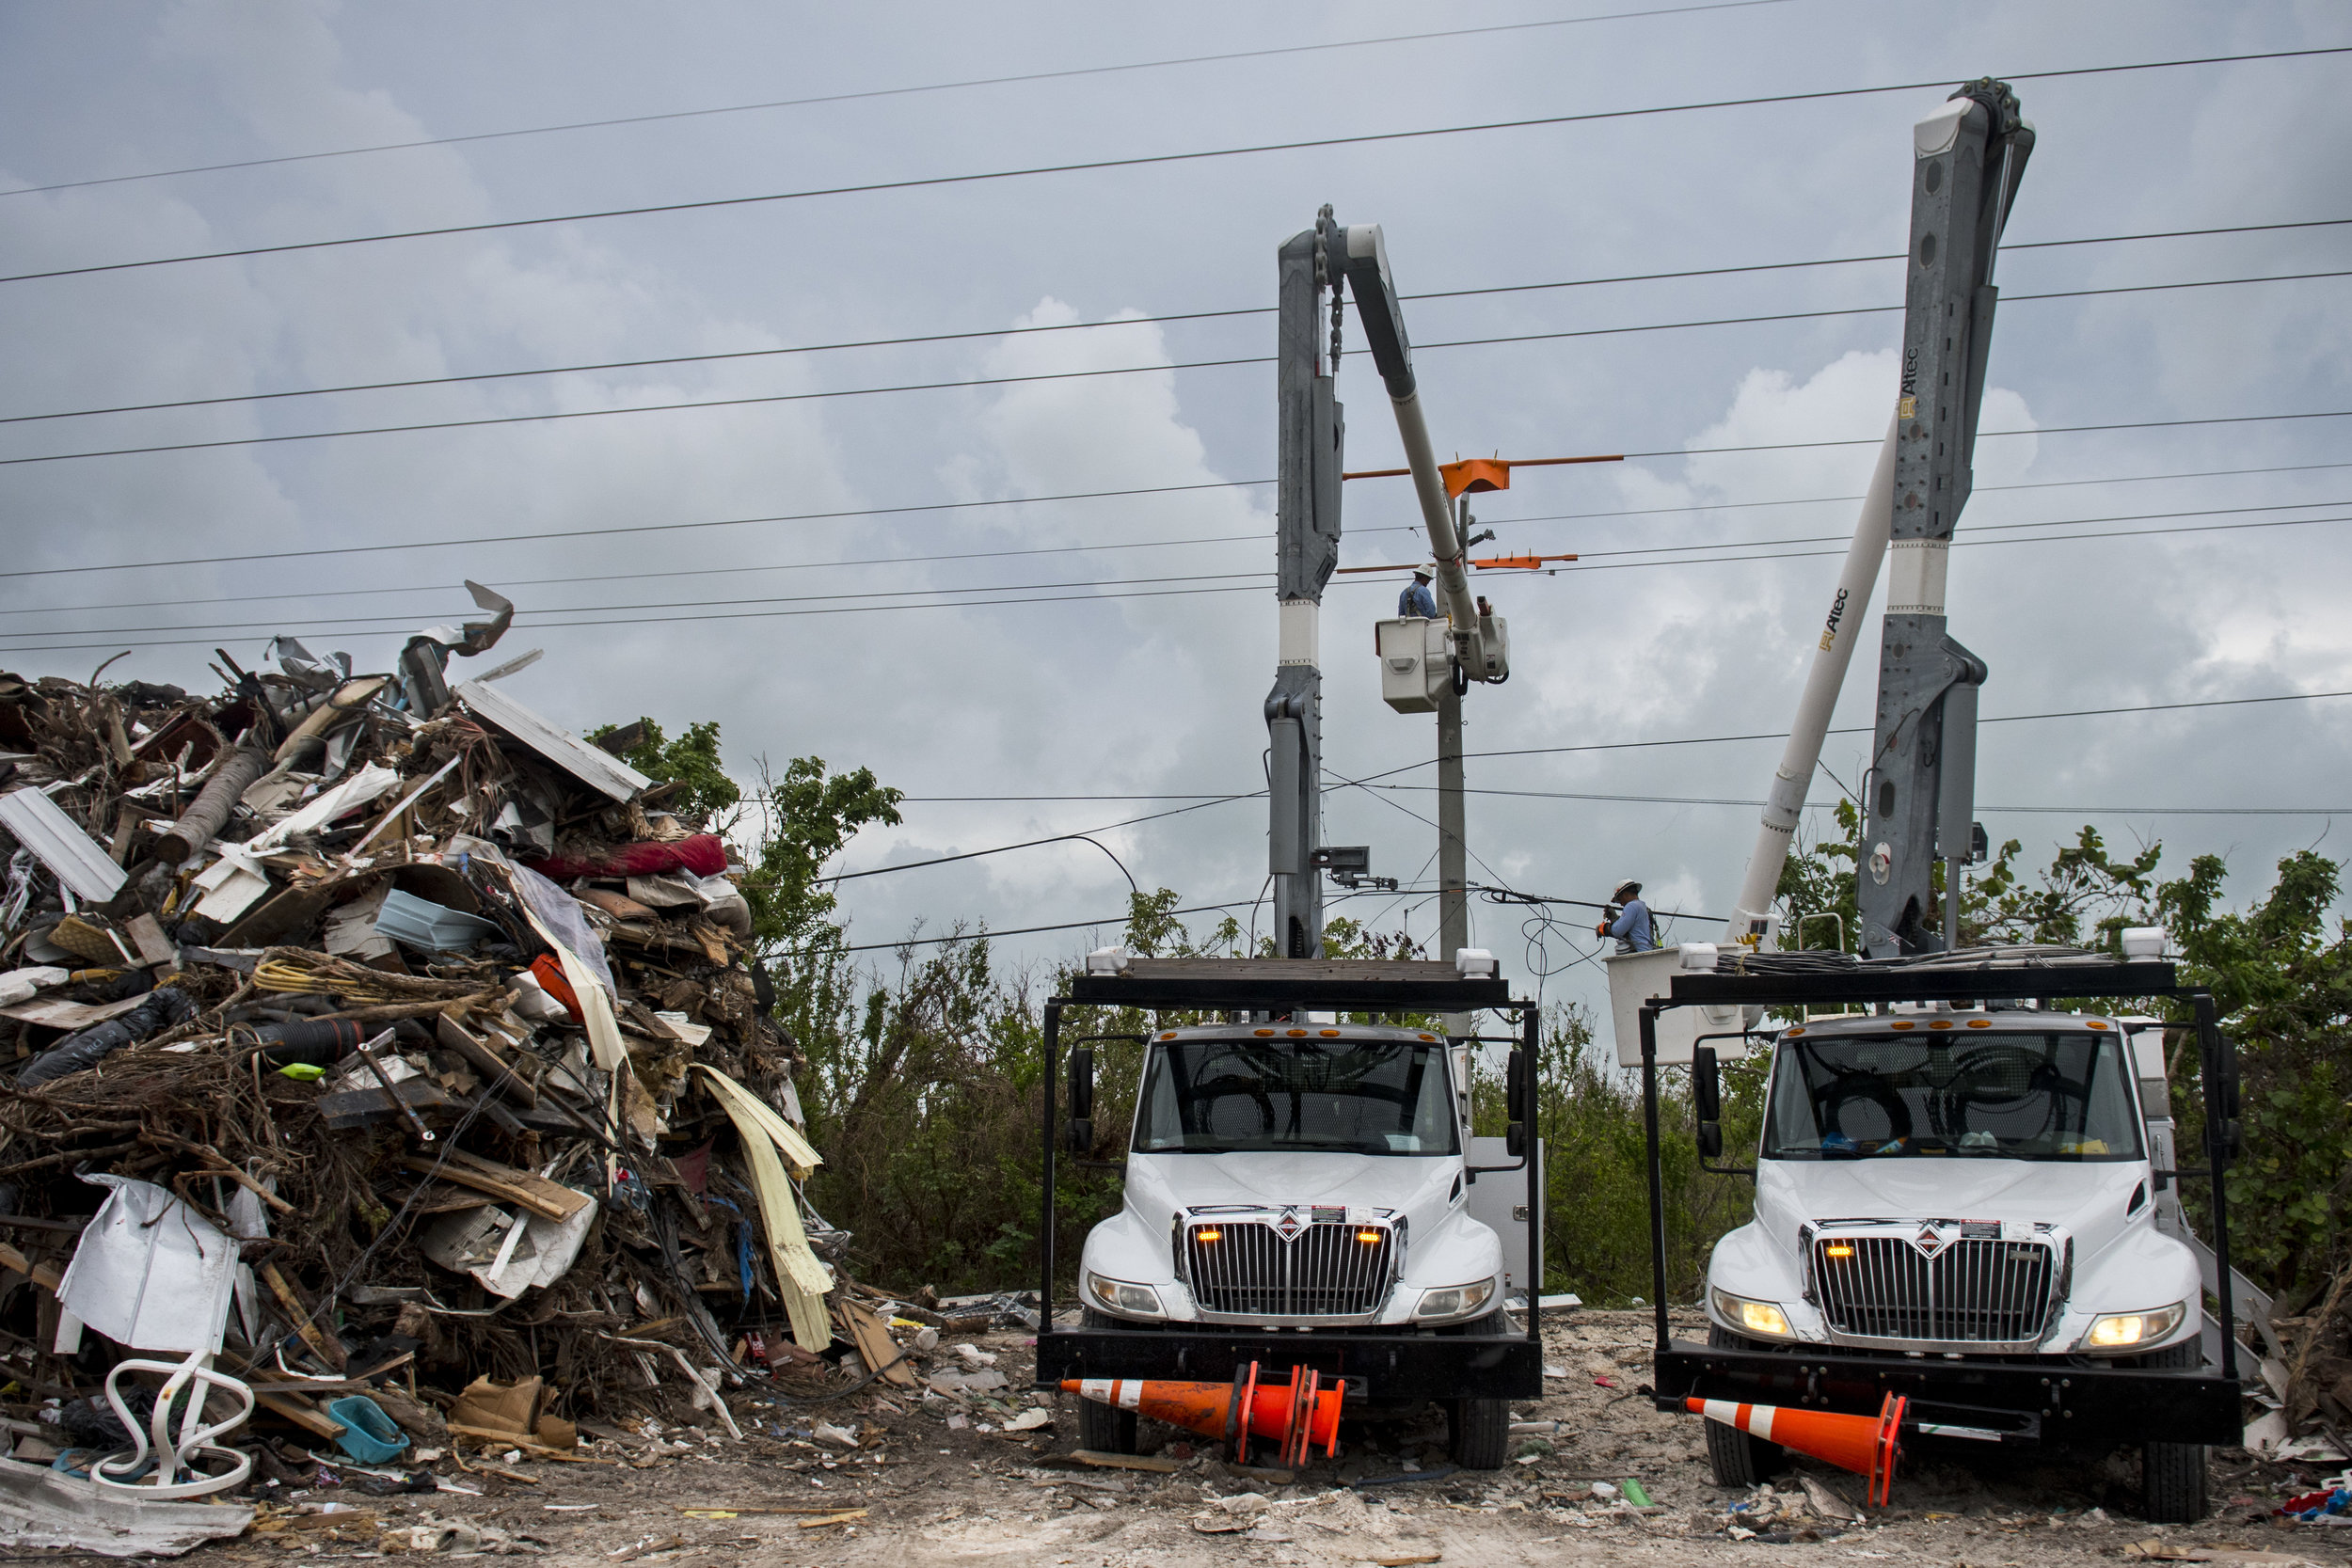  Over a month after Hurricane Irma made landfall multiple electric companies work around the clock to bring power back to the middle keys. Many lines were damaged during the hurricane and need to be repaired or replaced. 